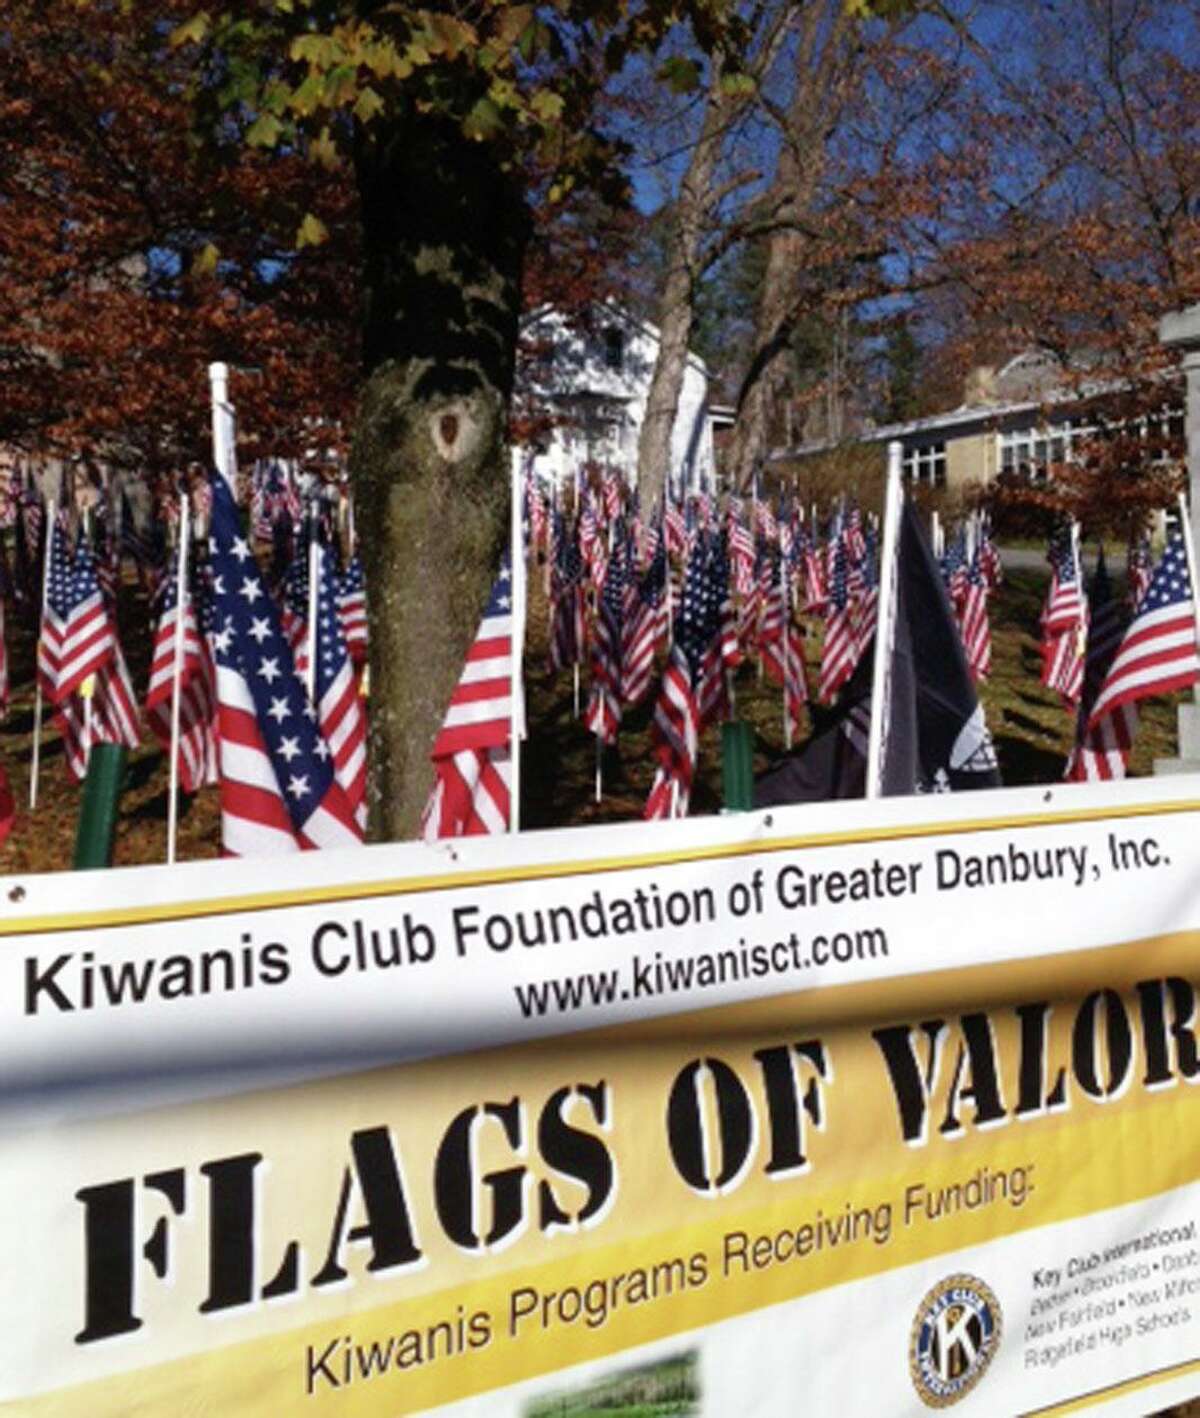 Hundreds of American flags are displayed on the hillside just north of the Village Green in New Milford. The Flags of Valor were placed by the Kiwanis Club of Danbury in tribute to the United States military, both veterans and those now serving. Many are individually sponsored by local businesses, or by families and friends of veterans and those now serving in the American military. The flags will be exhibited through Pearl Harbor Day, Sunday, Dec. 7. November 2014